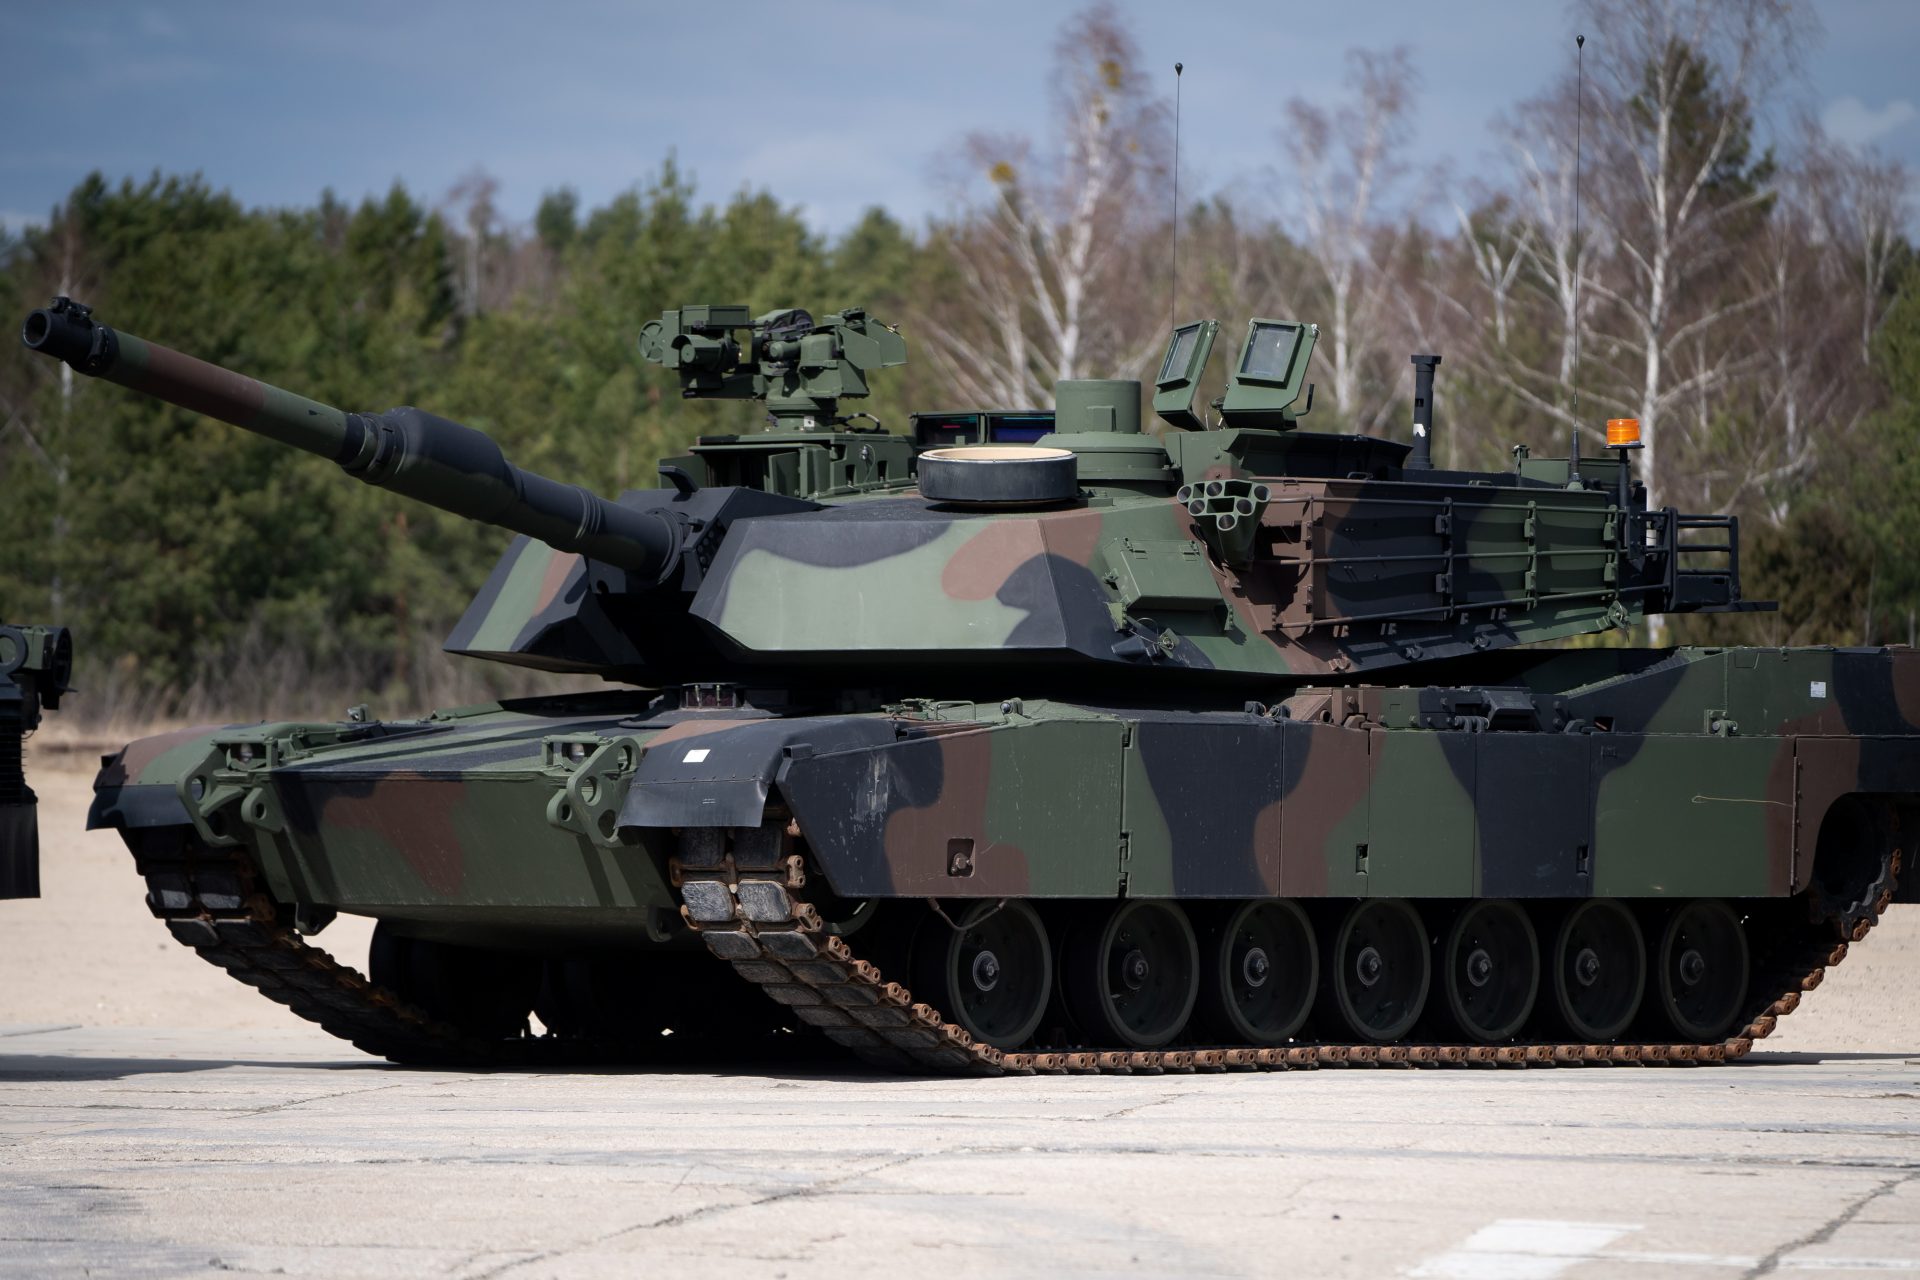 American Abrams tanks make first appearance in the Ukraine war